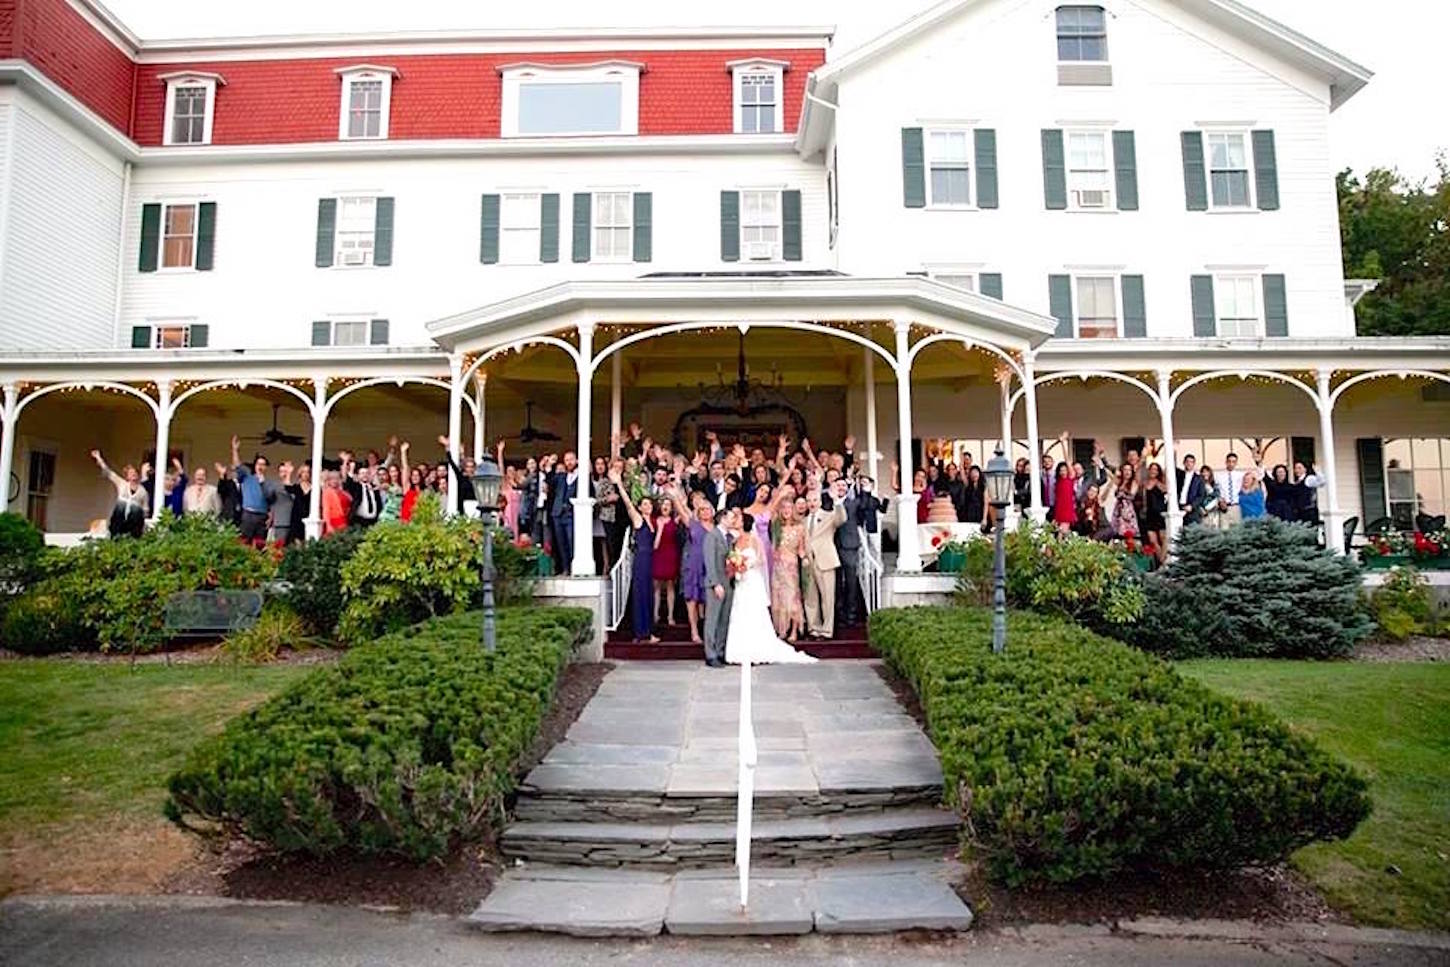 Wedding party and guests standing on the patio and steps.